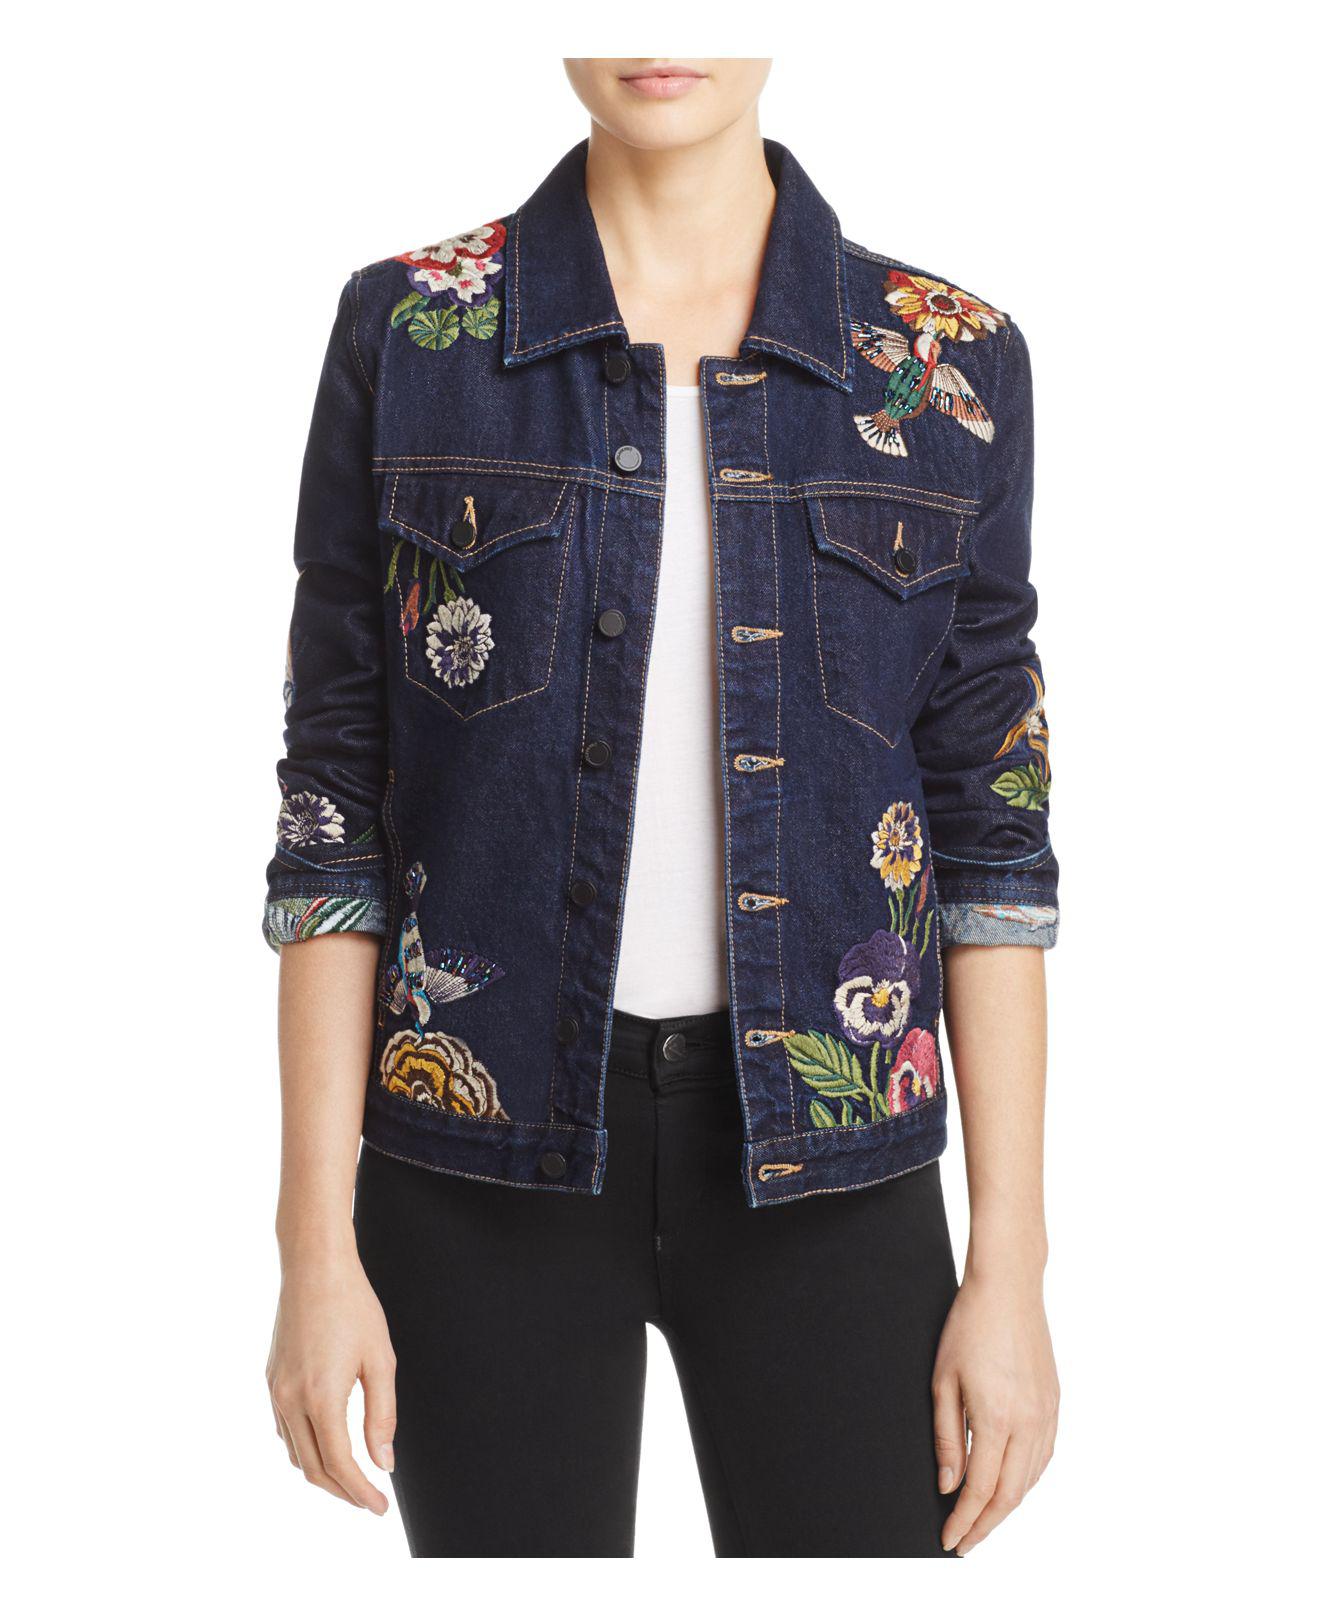 Lyst - Blank Nyc Embroidered Denim Jacket in Blue1320 x 1616